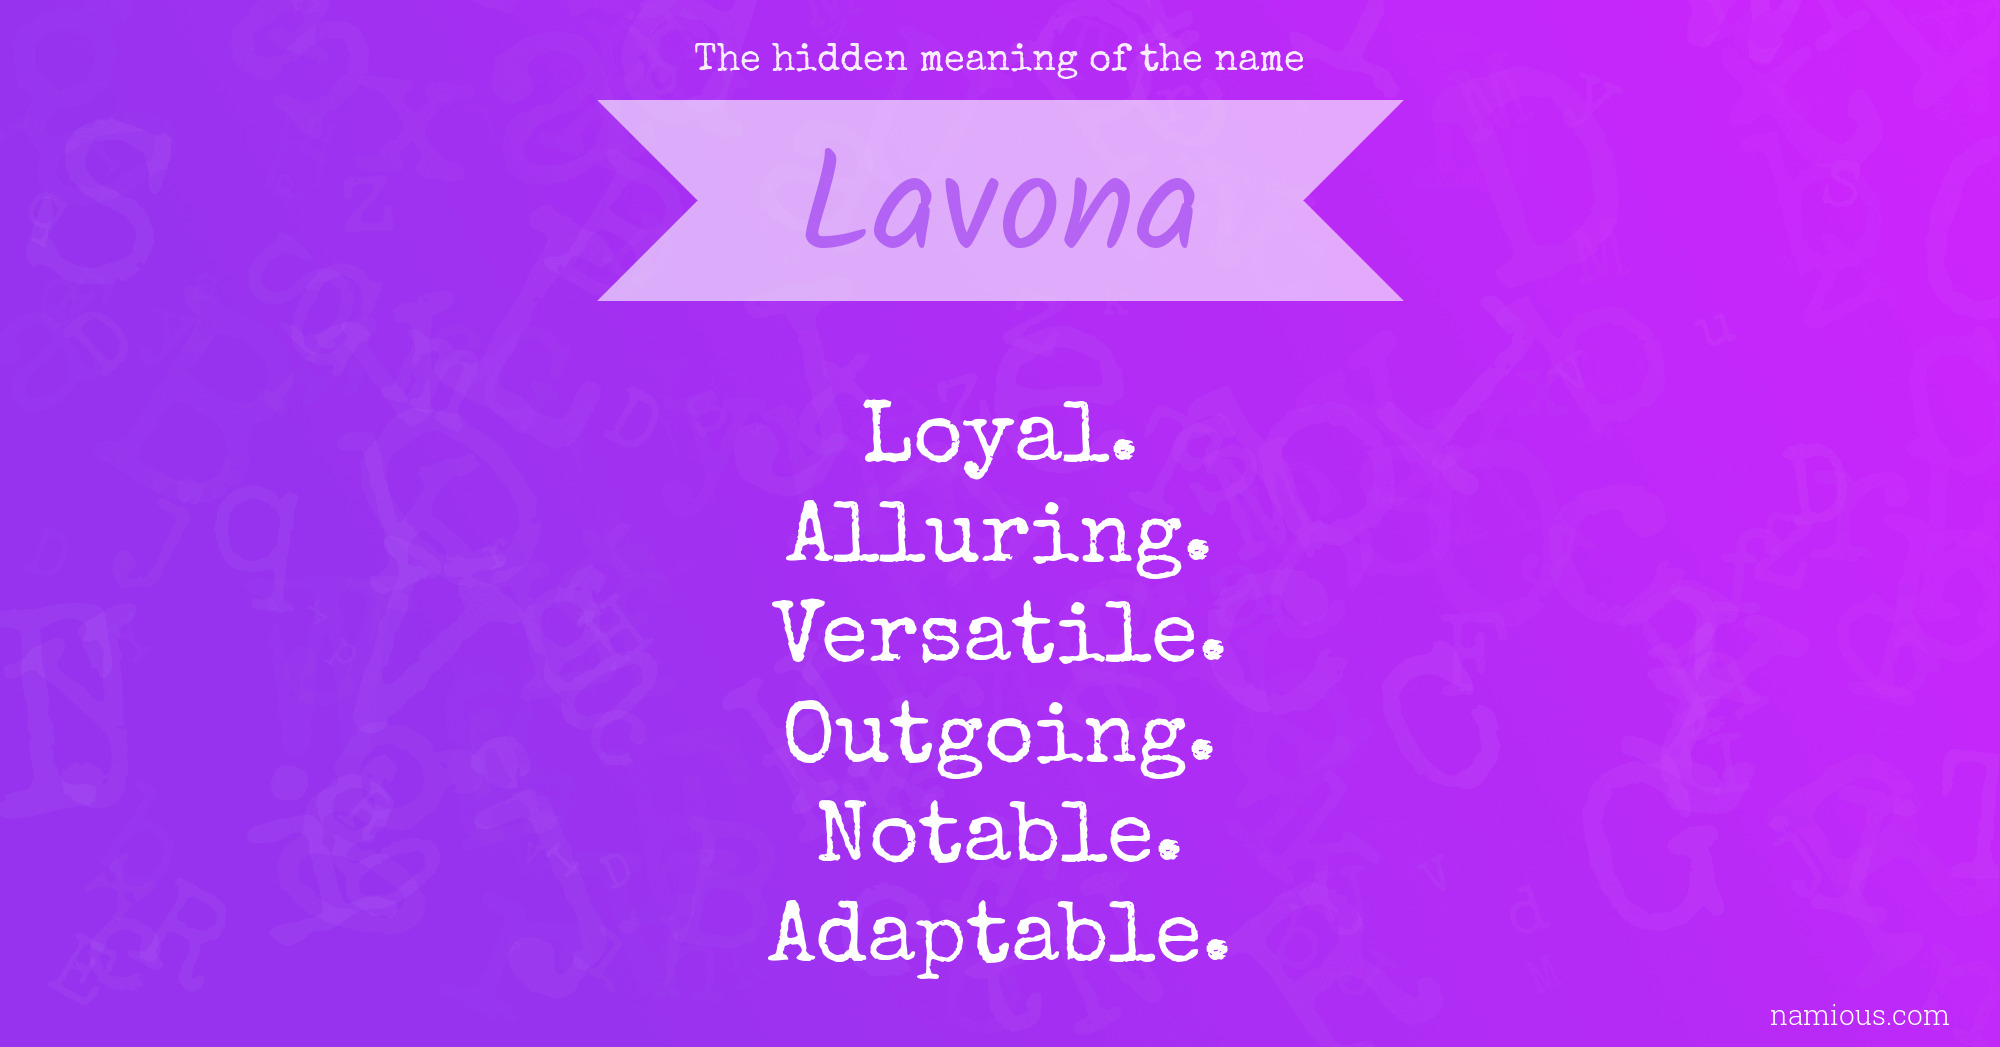 The hidden meaning of the name Lavona